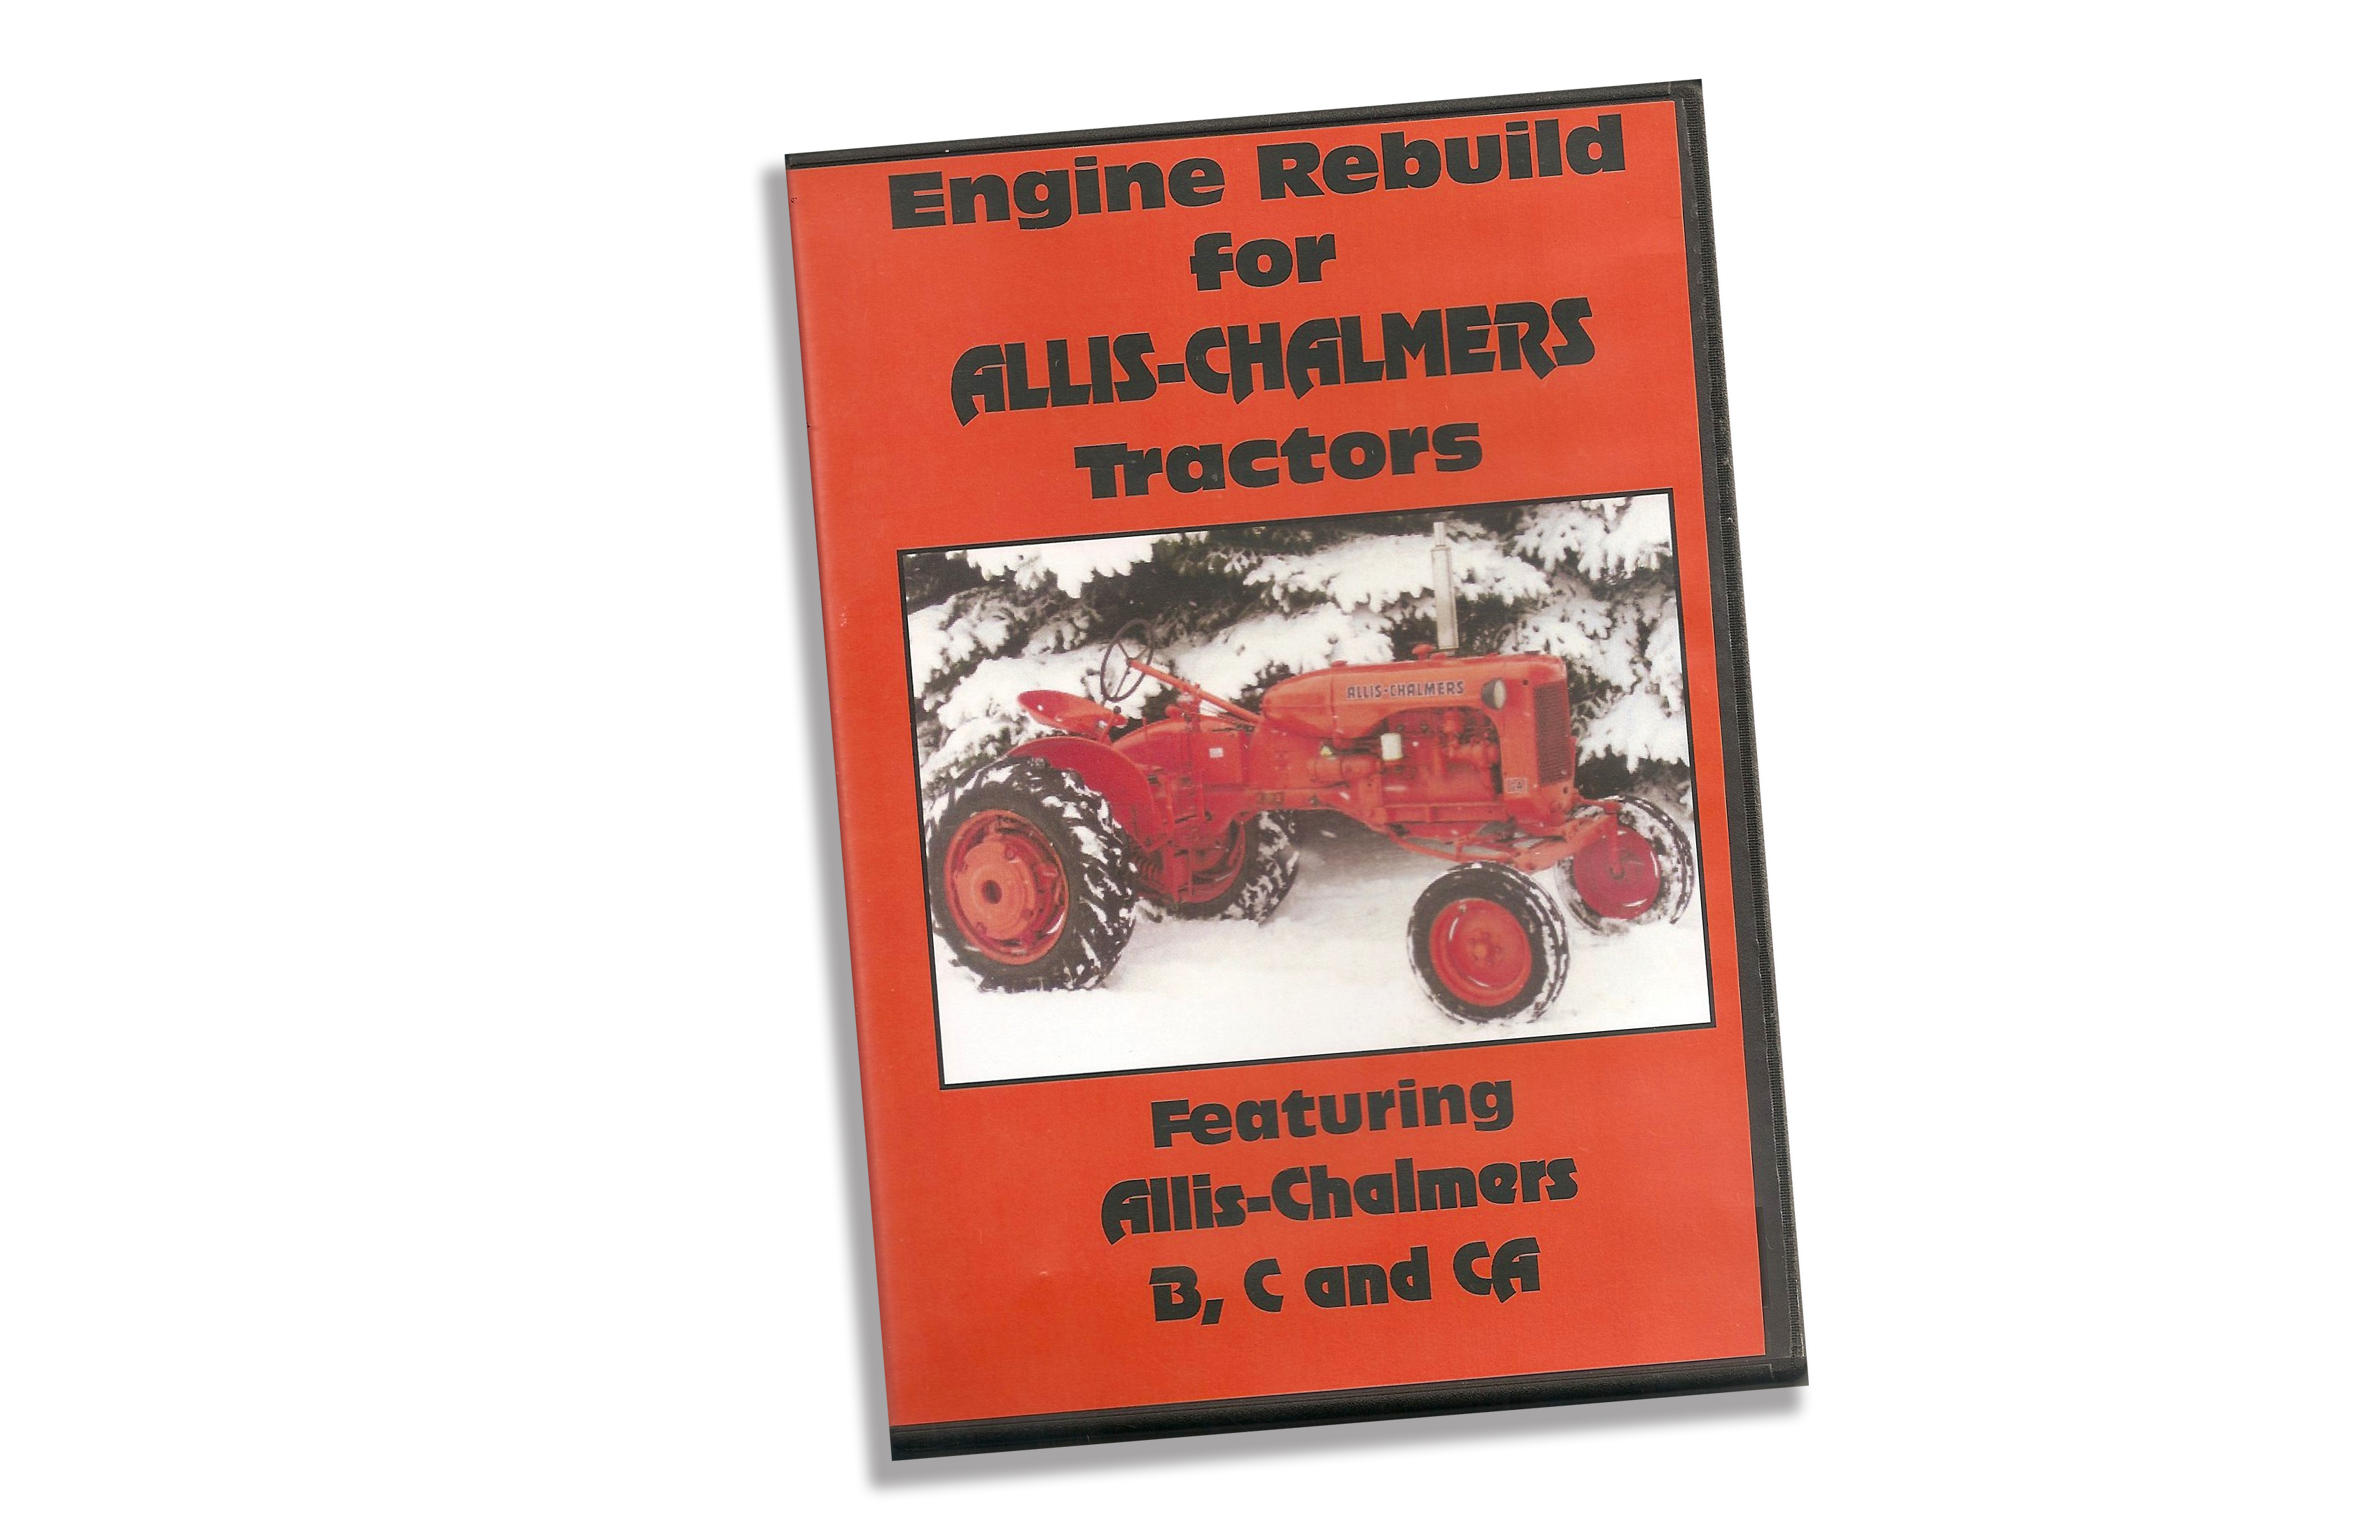 Engine Rebuild For Allis-Chalmers Tractors DVD, Featuring B, C And CA